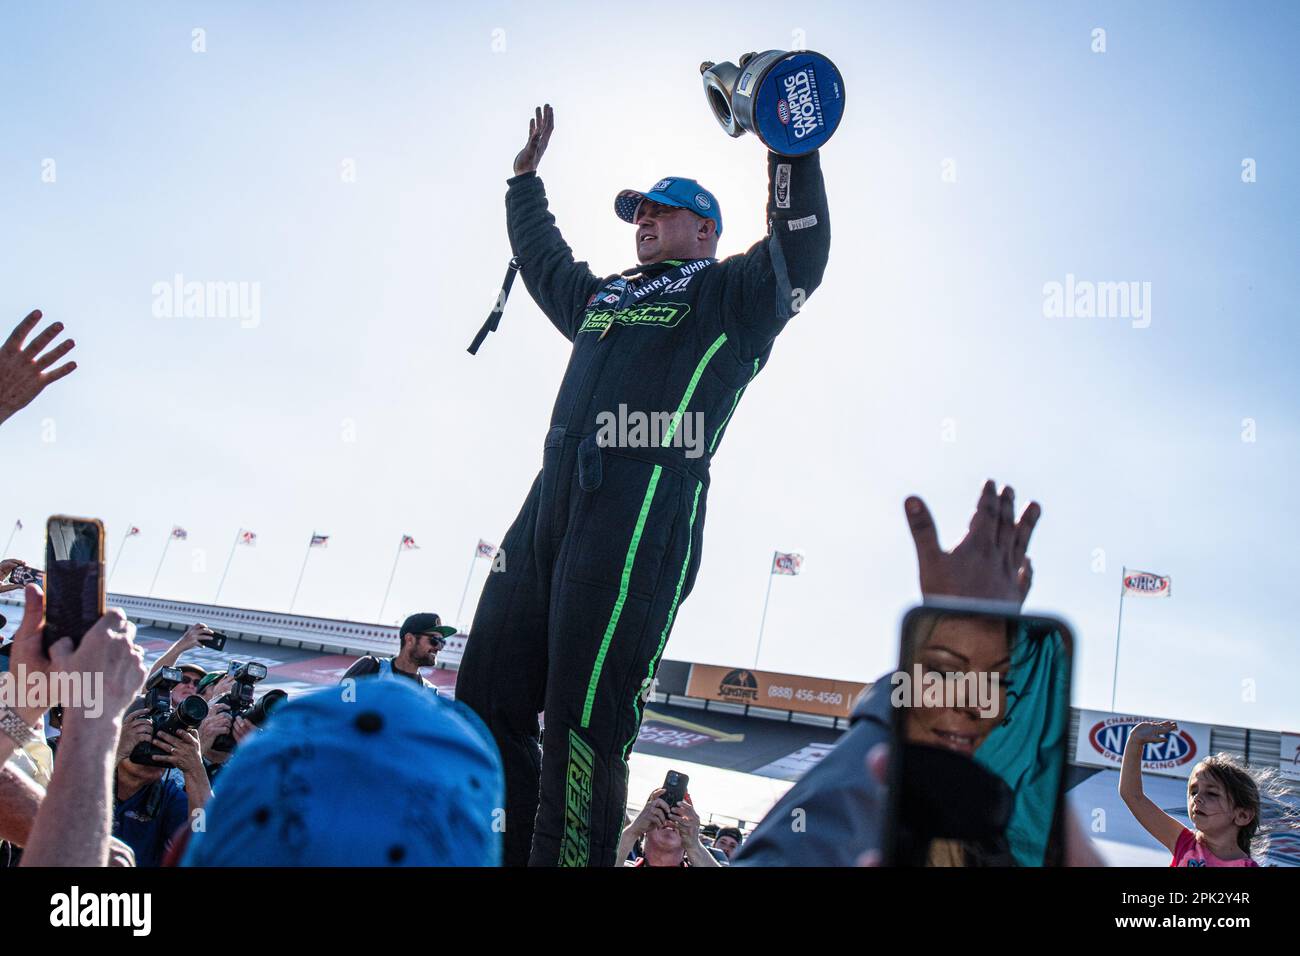 Pomona, United States. 02nd Apr, 2023. Matt Hagan holds up his trophy after taking the win in the Top Fuel division of the Lucas Oil Winternationals. Professional Drag racers nationwide rally together to compete at the Lucas Oil NHRA Winternationals held at the In-N-Out Burger Pomona Dragstrip for the 63rd consecutive year. Drivers battled over a three-day period starting on March 31st and concluding on April 2, fighting to take the titles in each of their divisions. (Photo by Jon Putman/SOPA Images/Sipa USA) Credit: Sipa USA/Alamy Live News Stock Photo